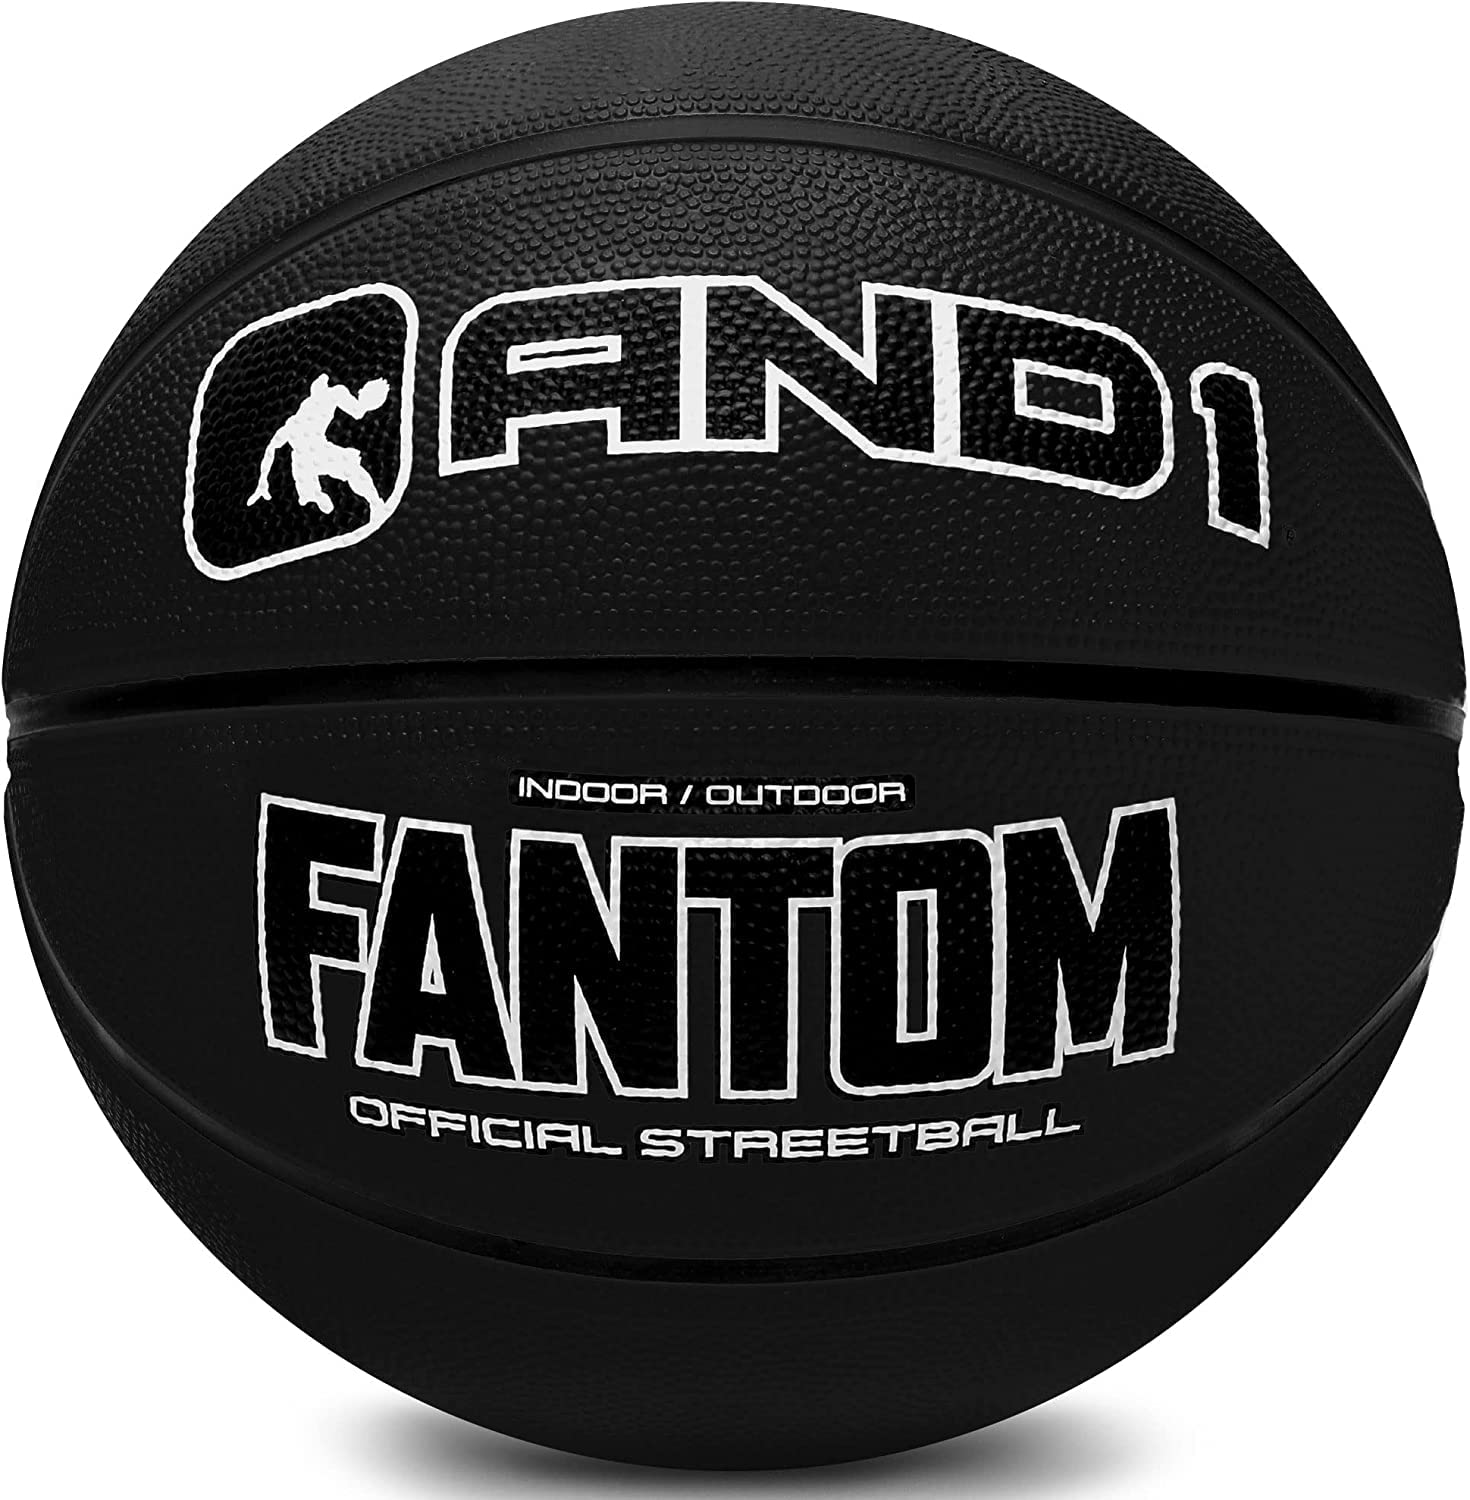 29.5" AND1 Fantom Rubber Street Basketball (Black) $5 + Free Shipping w/ Prime or on $35+